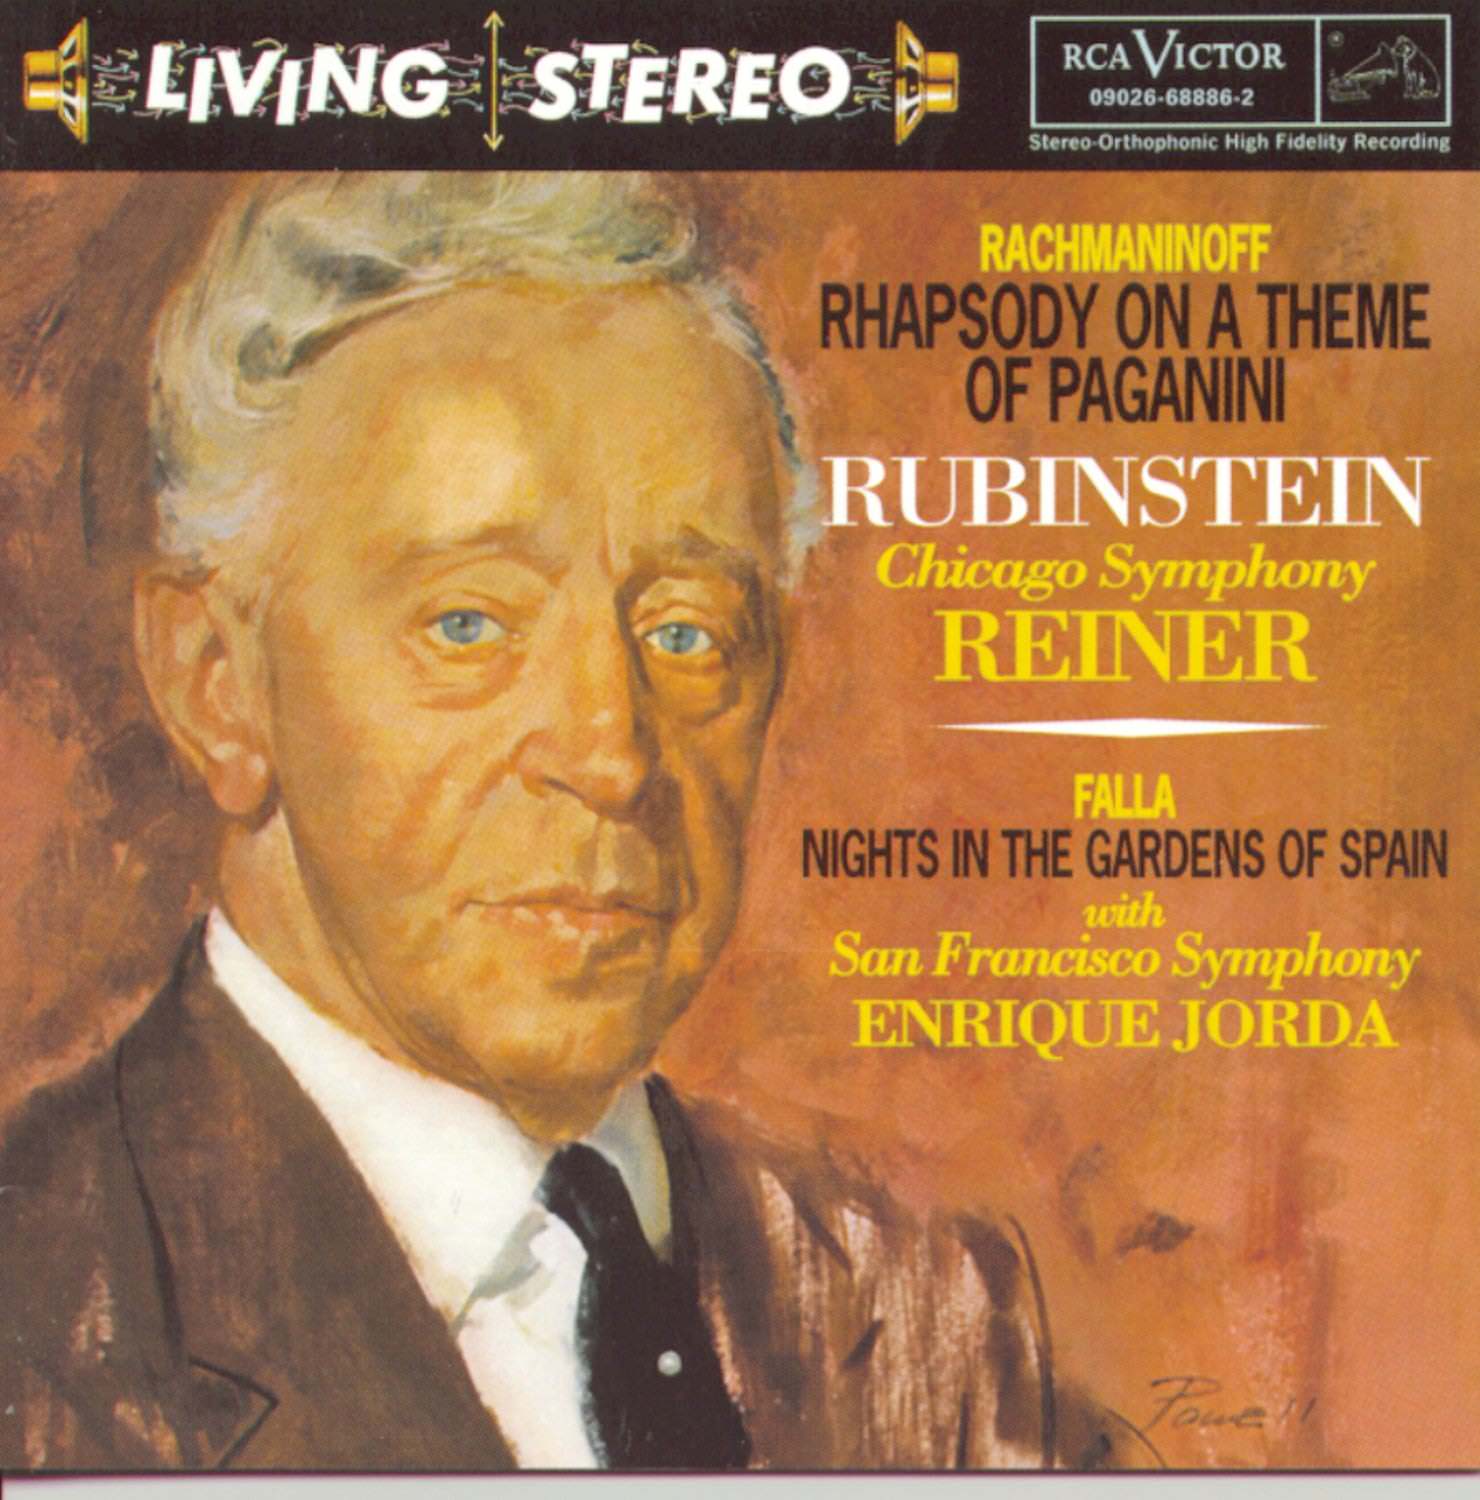 Arthur Rubinstein – Rachmaninoff: Rhapsody On A Theme Of Paganini – Falla: Nights In The Gardens Of Spain (1978/2016) [AcousticSounds DSF DSD64/2.82MHz]